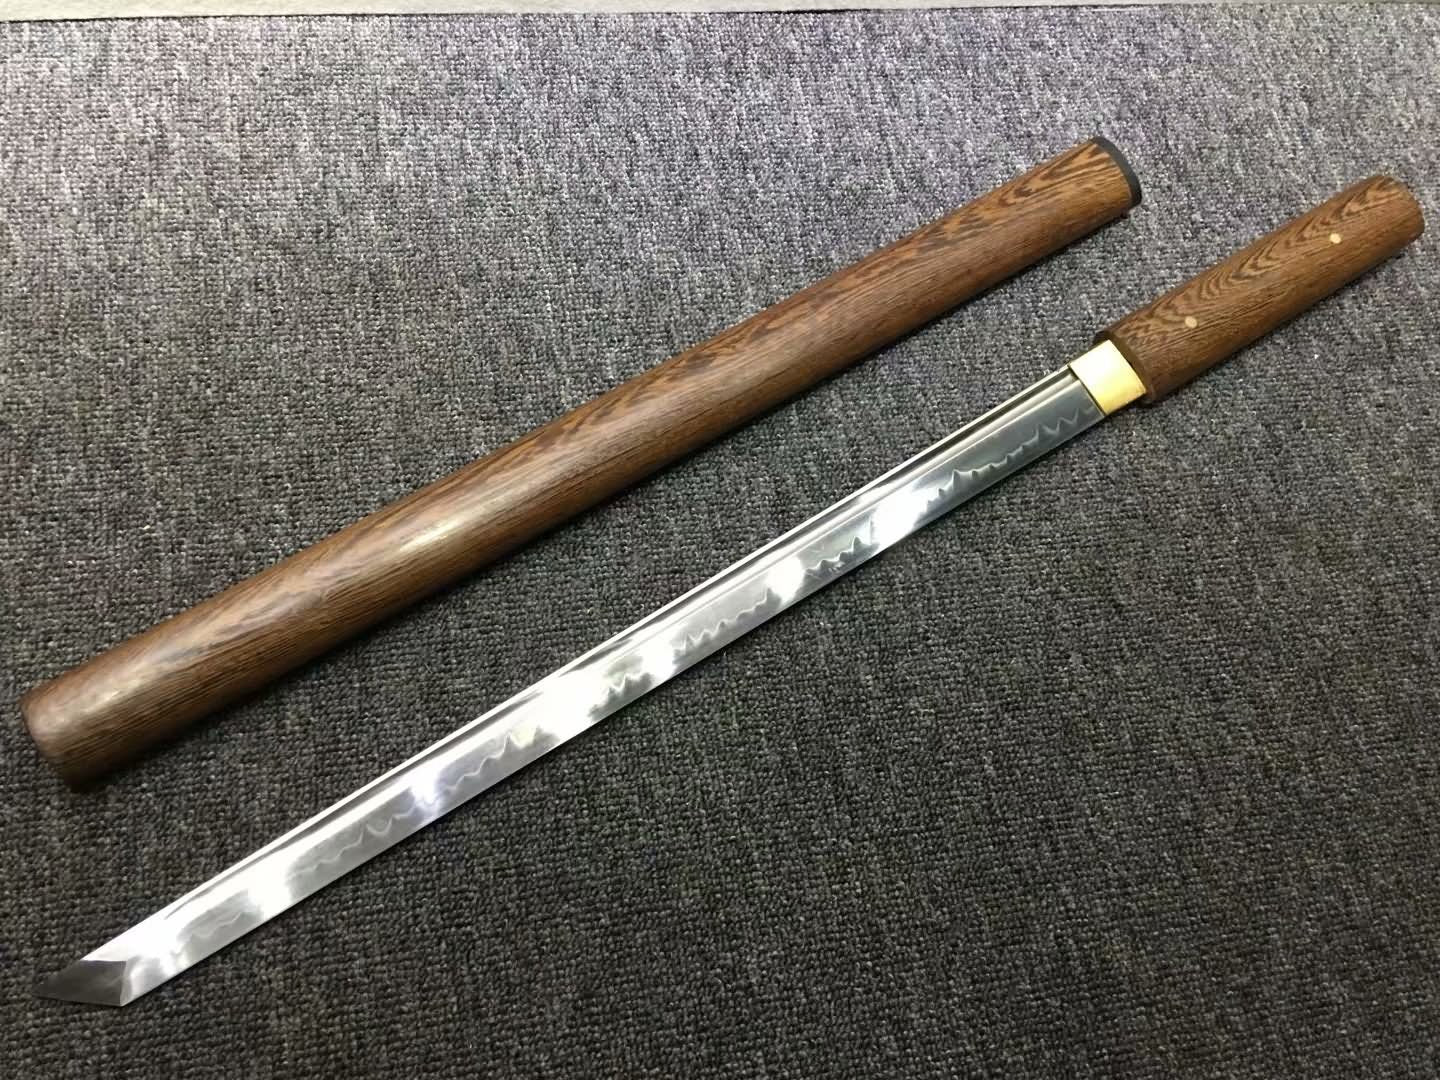 Tang dao,Hand forged,High carbon steel burn blade,Rosewood scabbard - Chinese sword shop